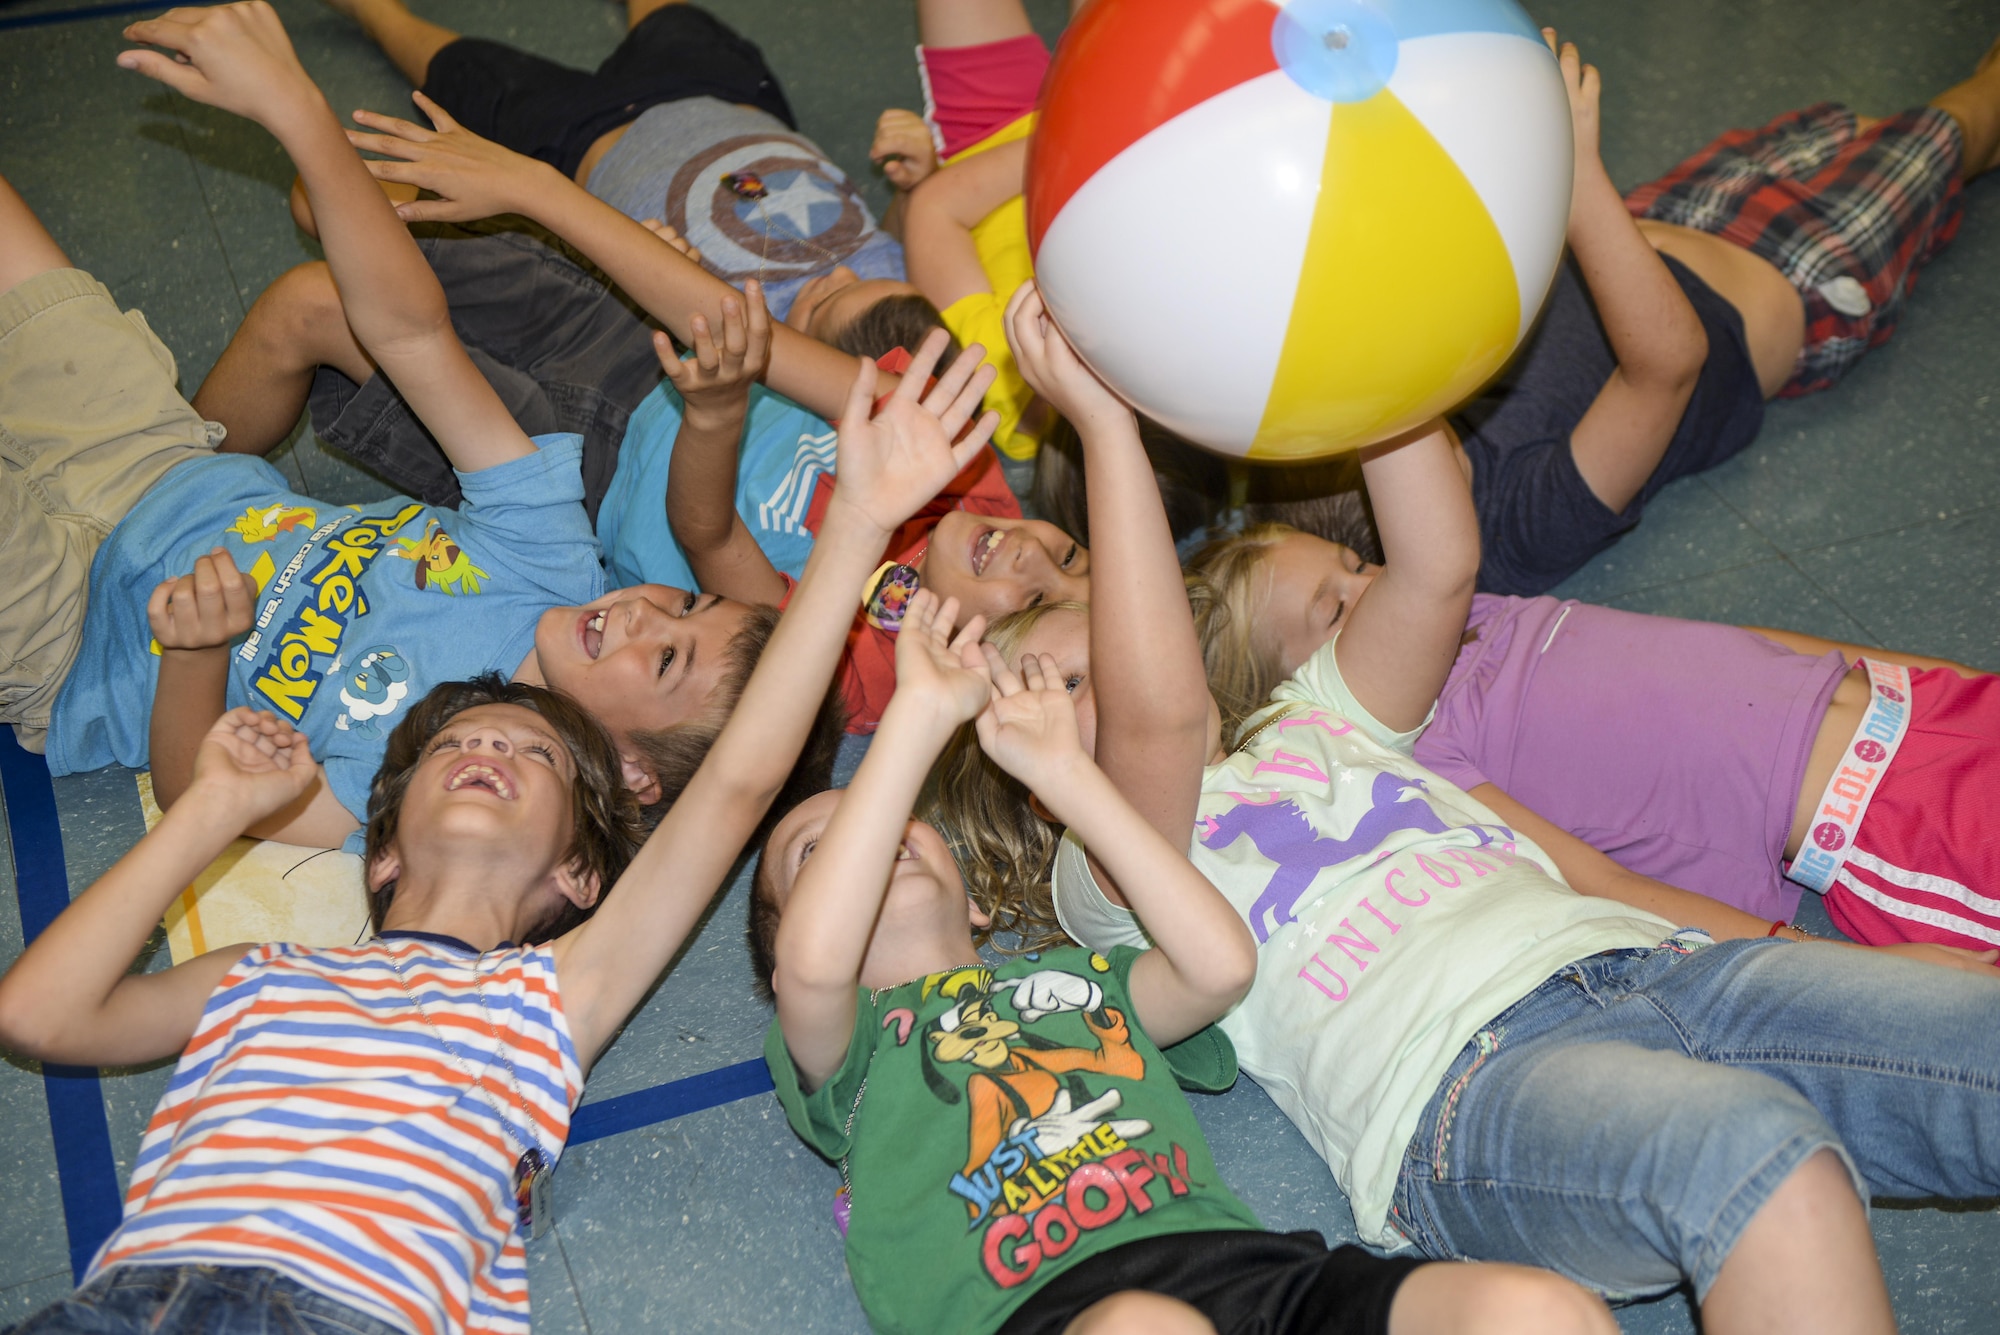 A group of children attending the base chapel’s vacation bible school toss a ball over their heads in an effort to keep it from hitting the ground as part of a game at Holloman Air Force Base, N.M., on July 19. Children attending the VBS program participate in a variety of activities, ranging from science experiments to arts and crafts. (U.S. Air Force photo by Amn Alexis P. Docherty/released) 